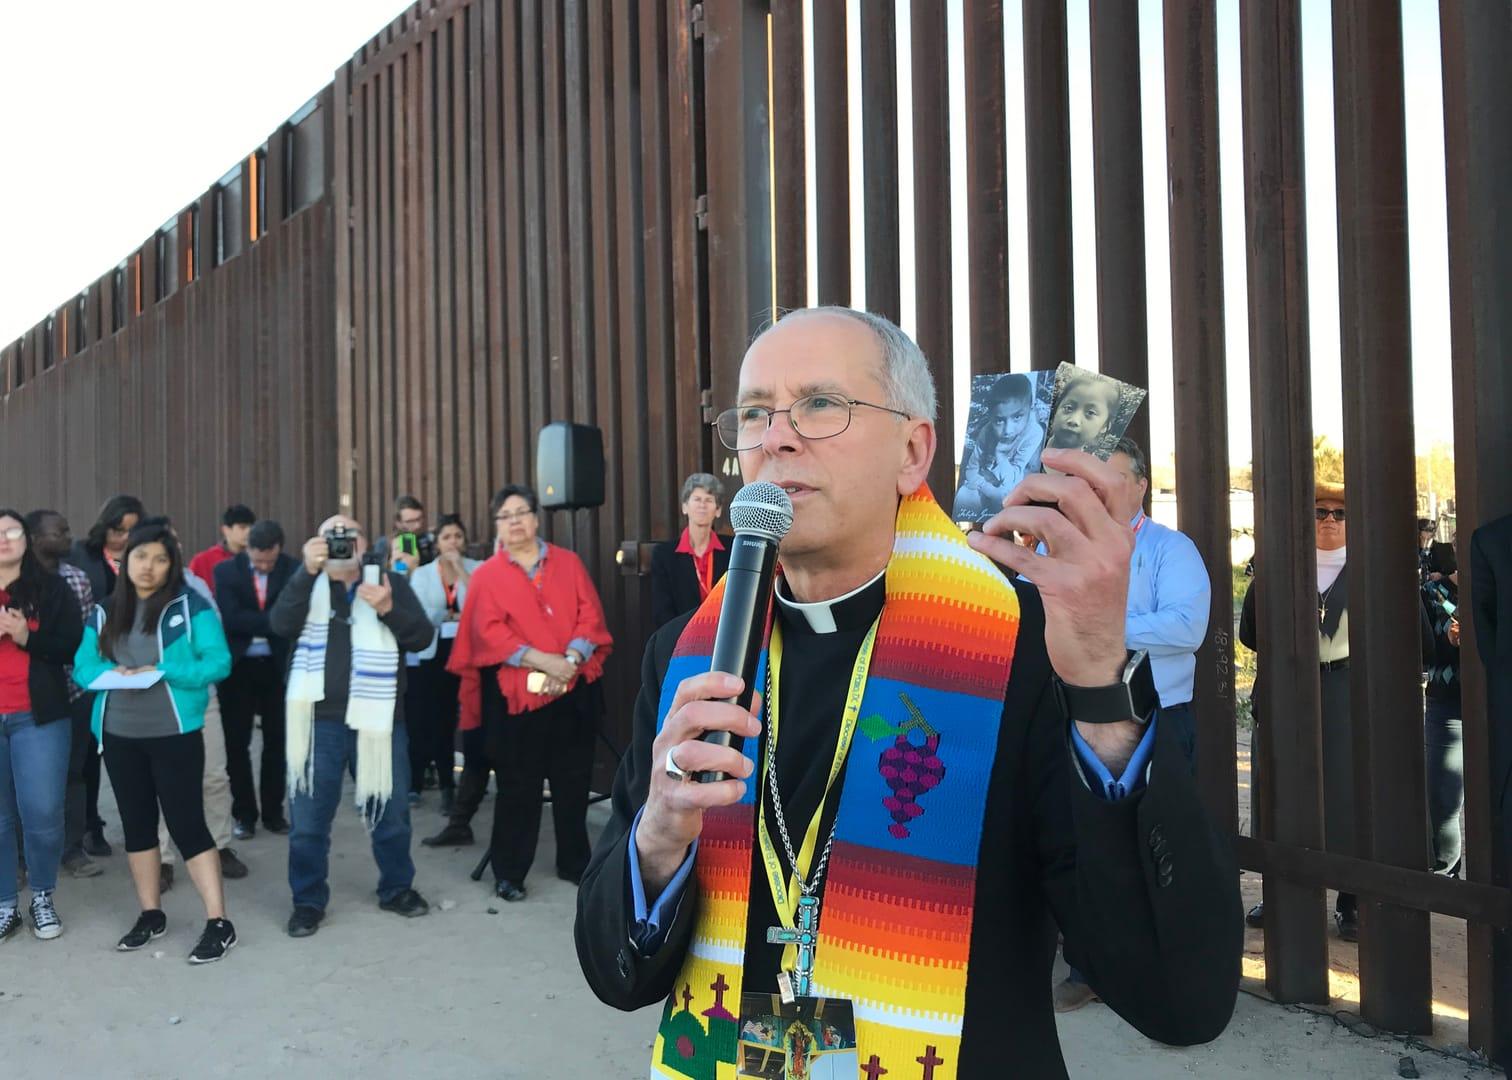 Bishop says border security can’t come at the expense of humanity, fairness